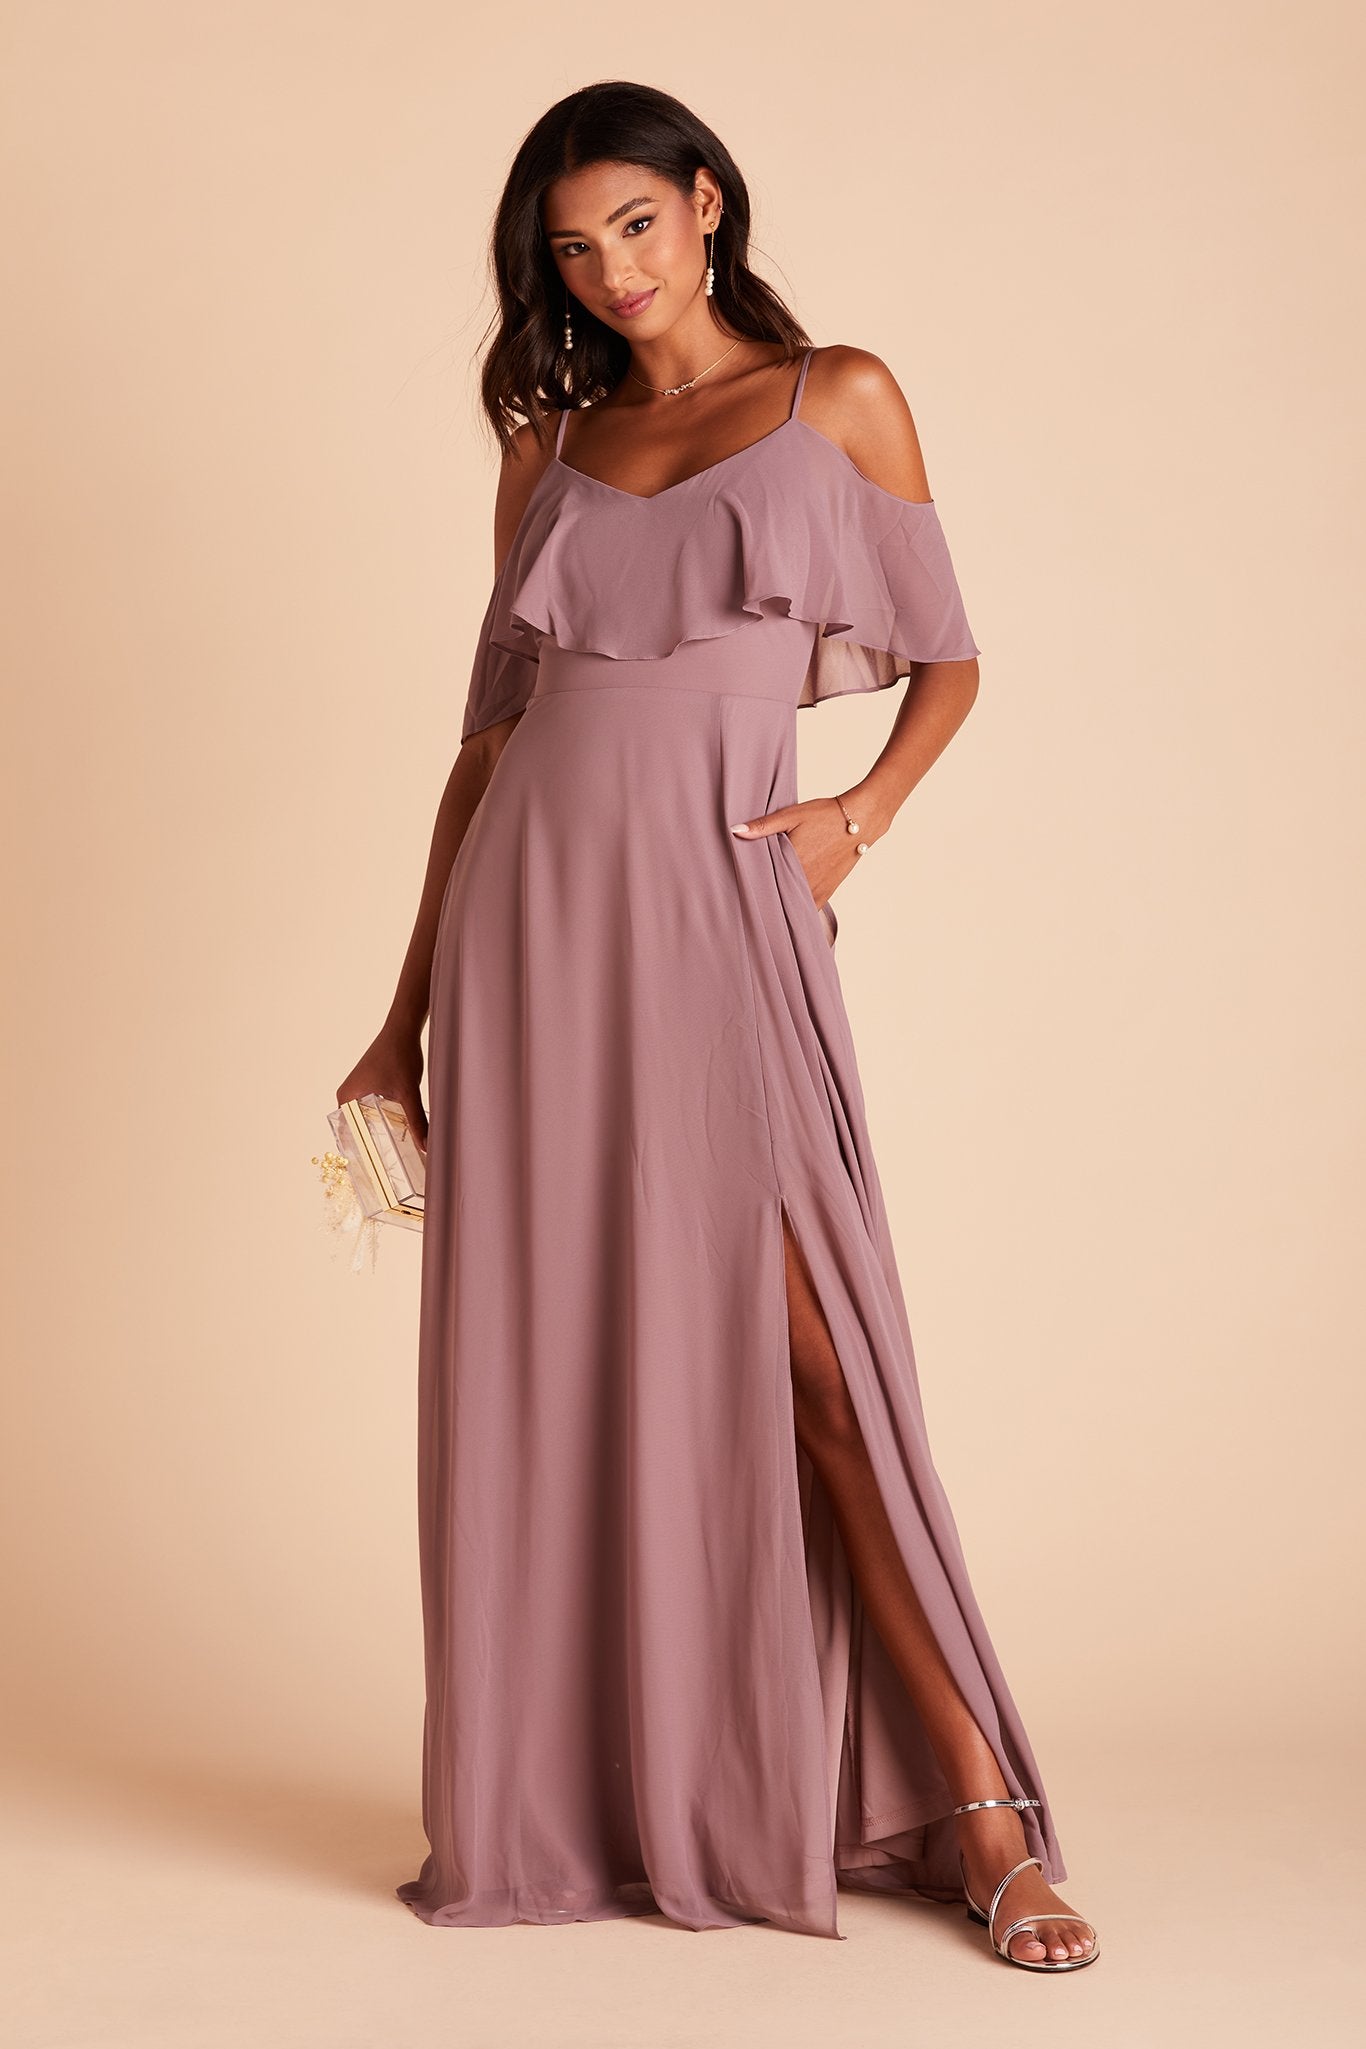 Jane convertible bridesmaid dress with slit in dark mauve chiffon by Birdy Grey, front view with hand in pocket